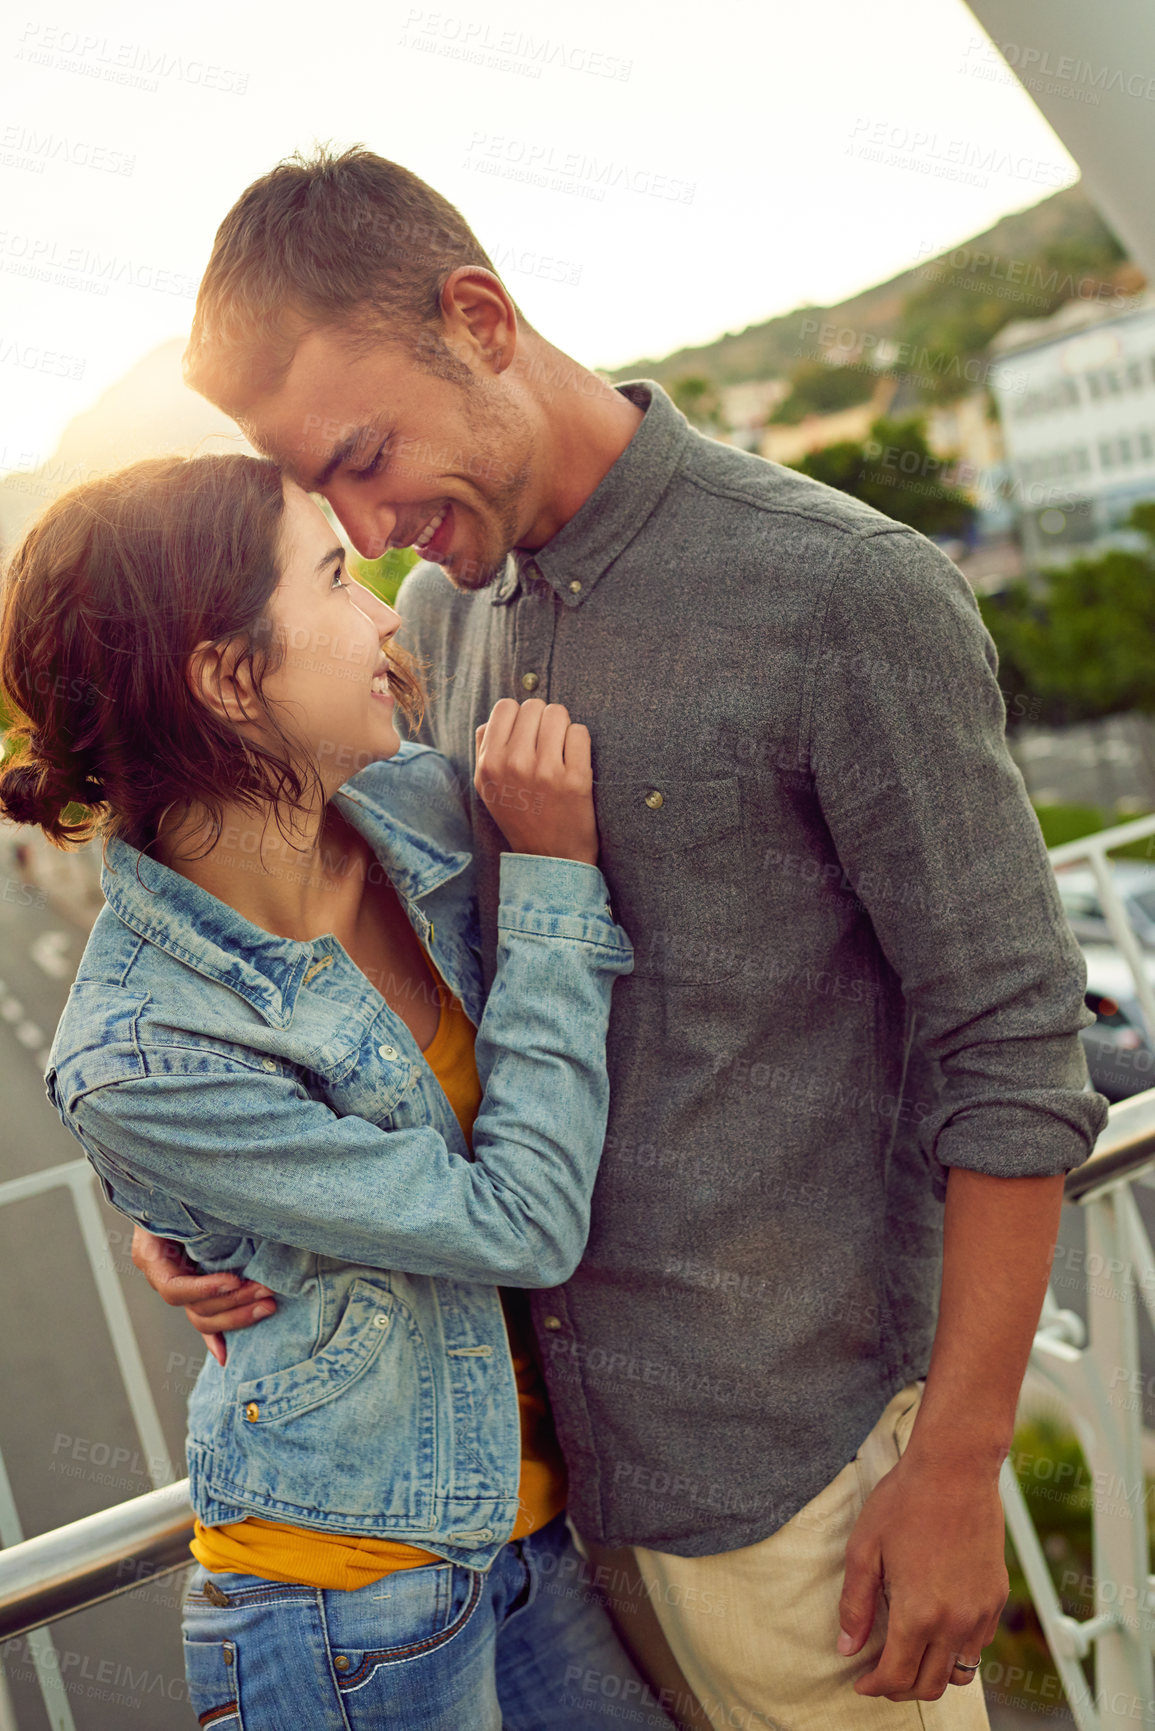 Buy stock photo Shot of a happy young couple enjoying a romantic moment in the city